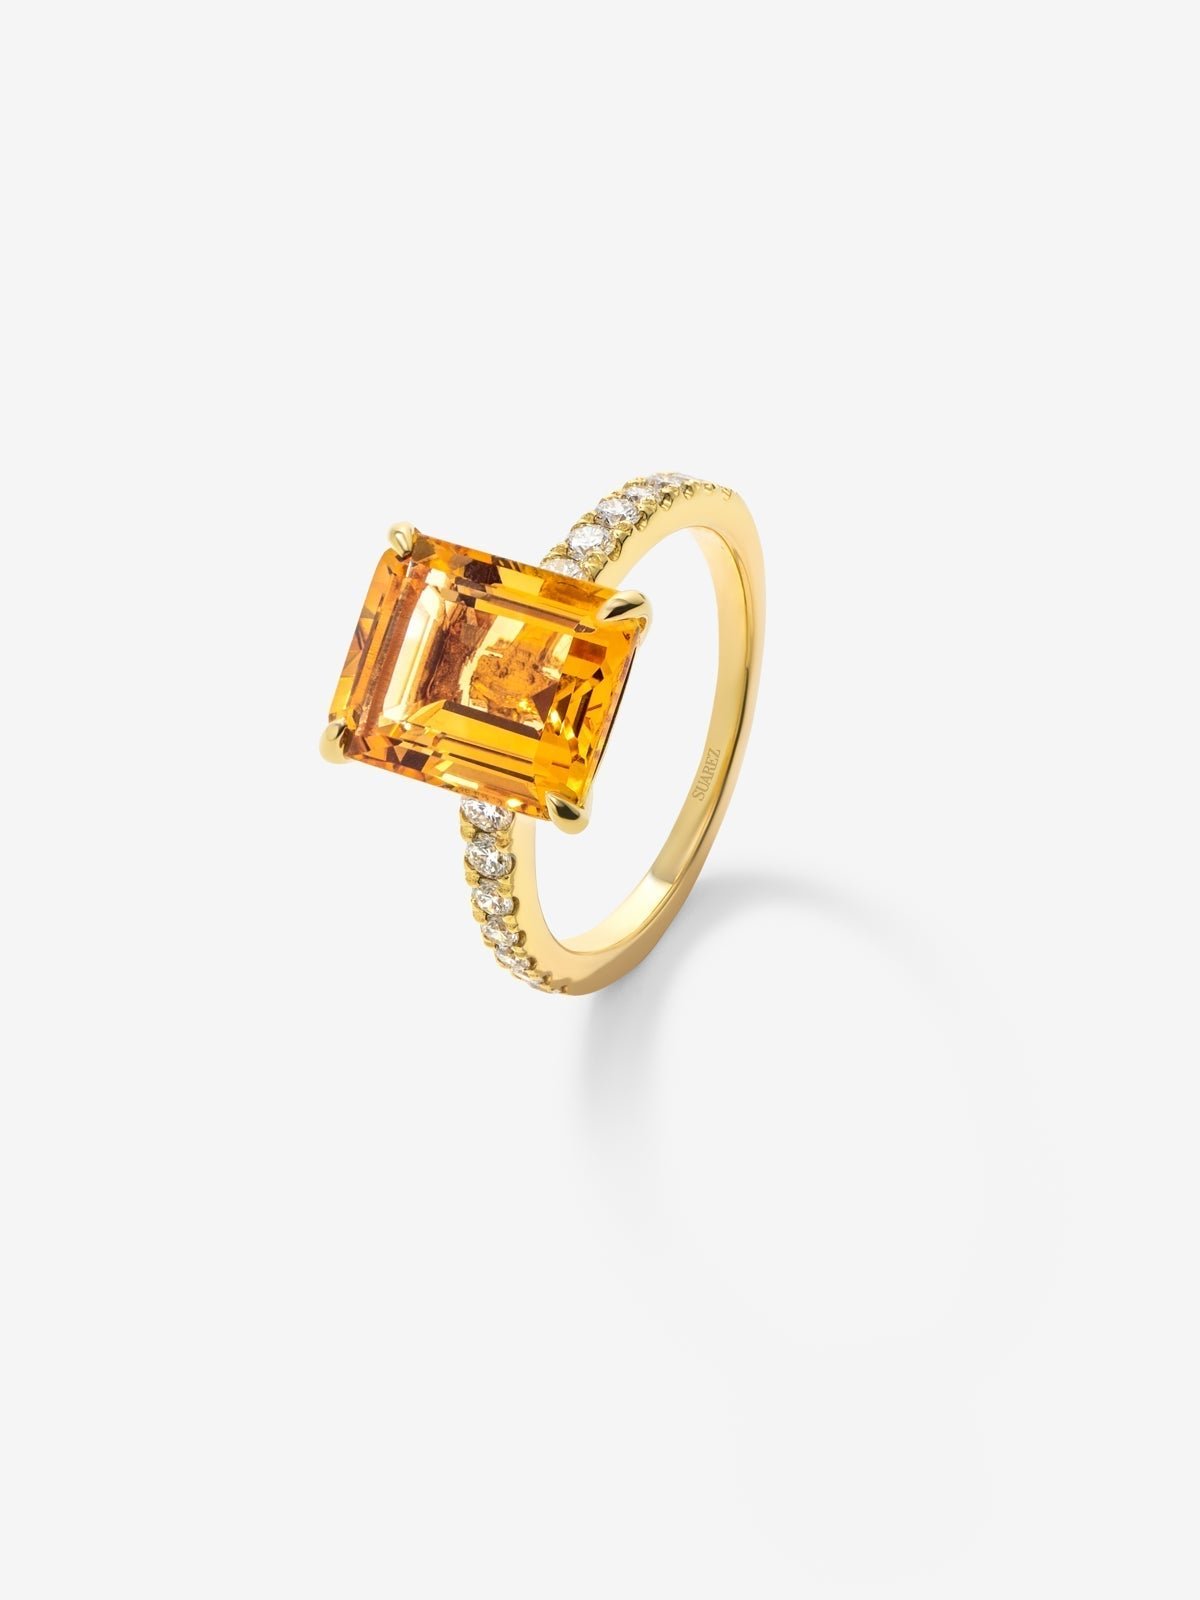 18K yellow gold ring with radiant cut citrine quartz of 1.2 cts and 18 brilliant cut diamonds with a total of 0.18 cts